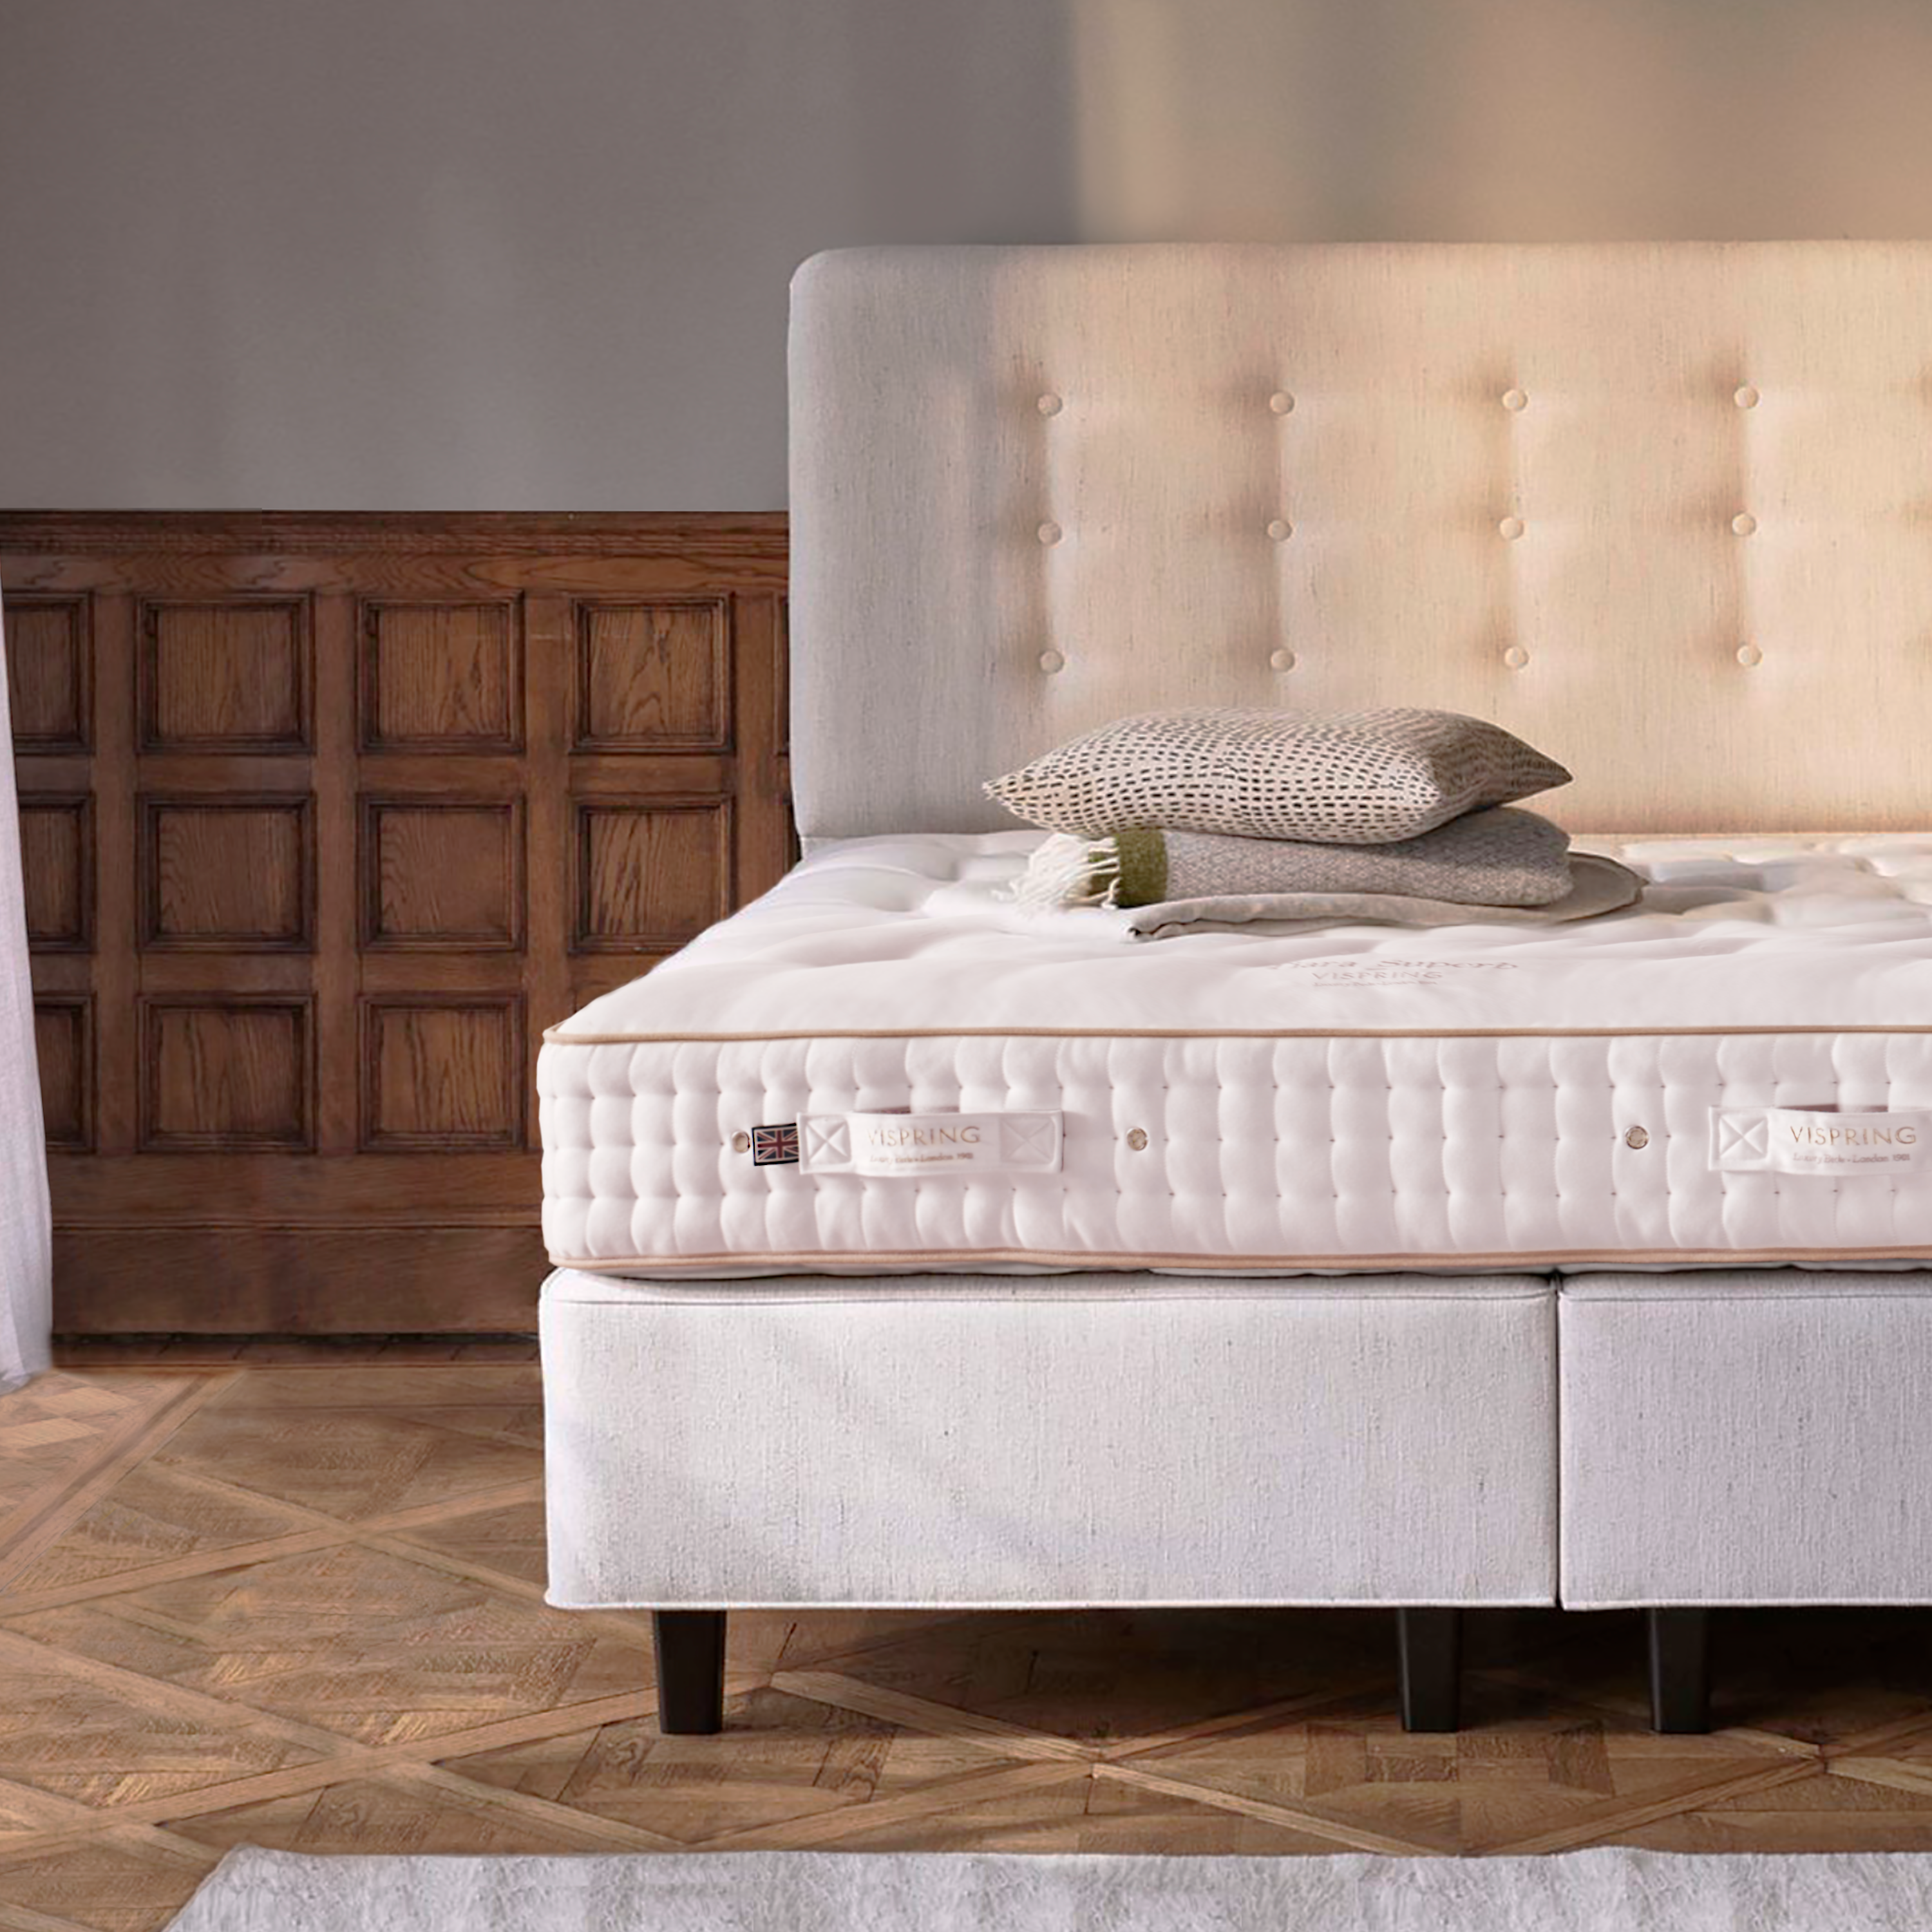 Vispring Tiara Mattress The 2,856 coil count and two-layer configuration provide exceptional conformability and resilience, and the Shetland wool and hand-teased horsetail fibers create a top layer that will give you many years of luxurious comfort.